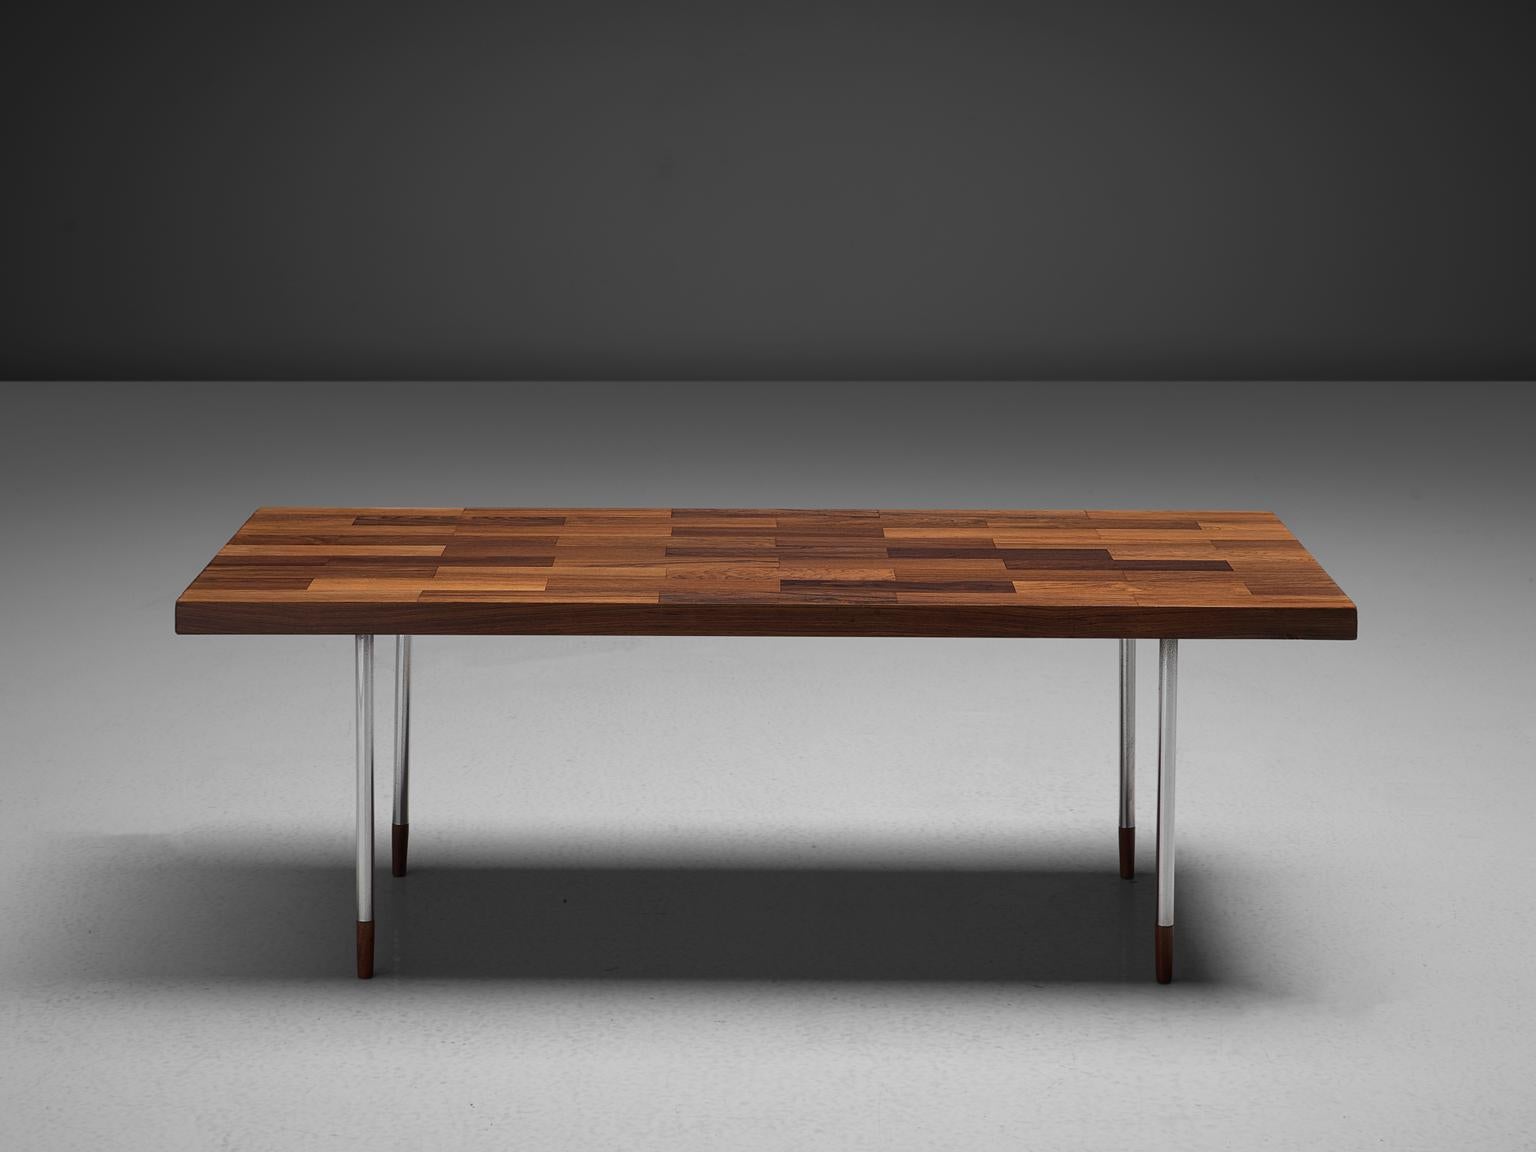 Fristho, coffee table, rosewood and stainless steel, the Netherlands, 1960s.

The rectangular top is made with rosewood veneer slats, in wonderful different tones. The warm expression of the basic top beautifully contrasts to the thin tubular